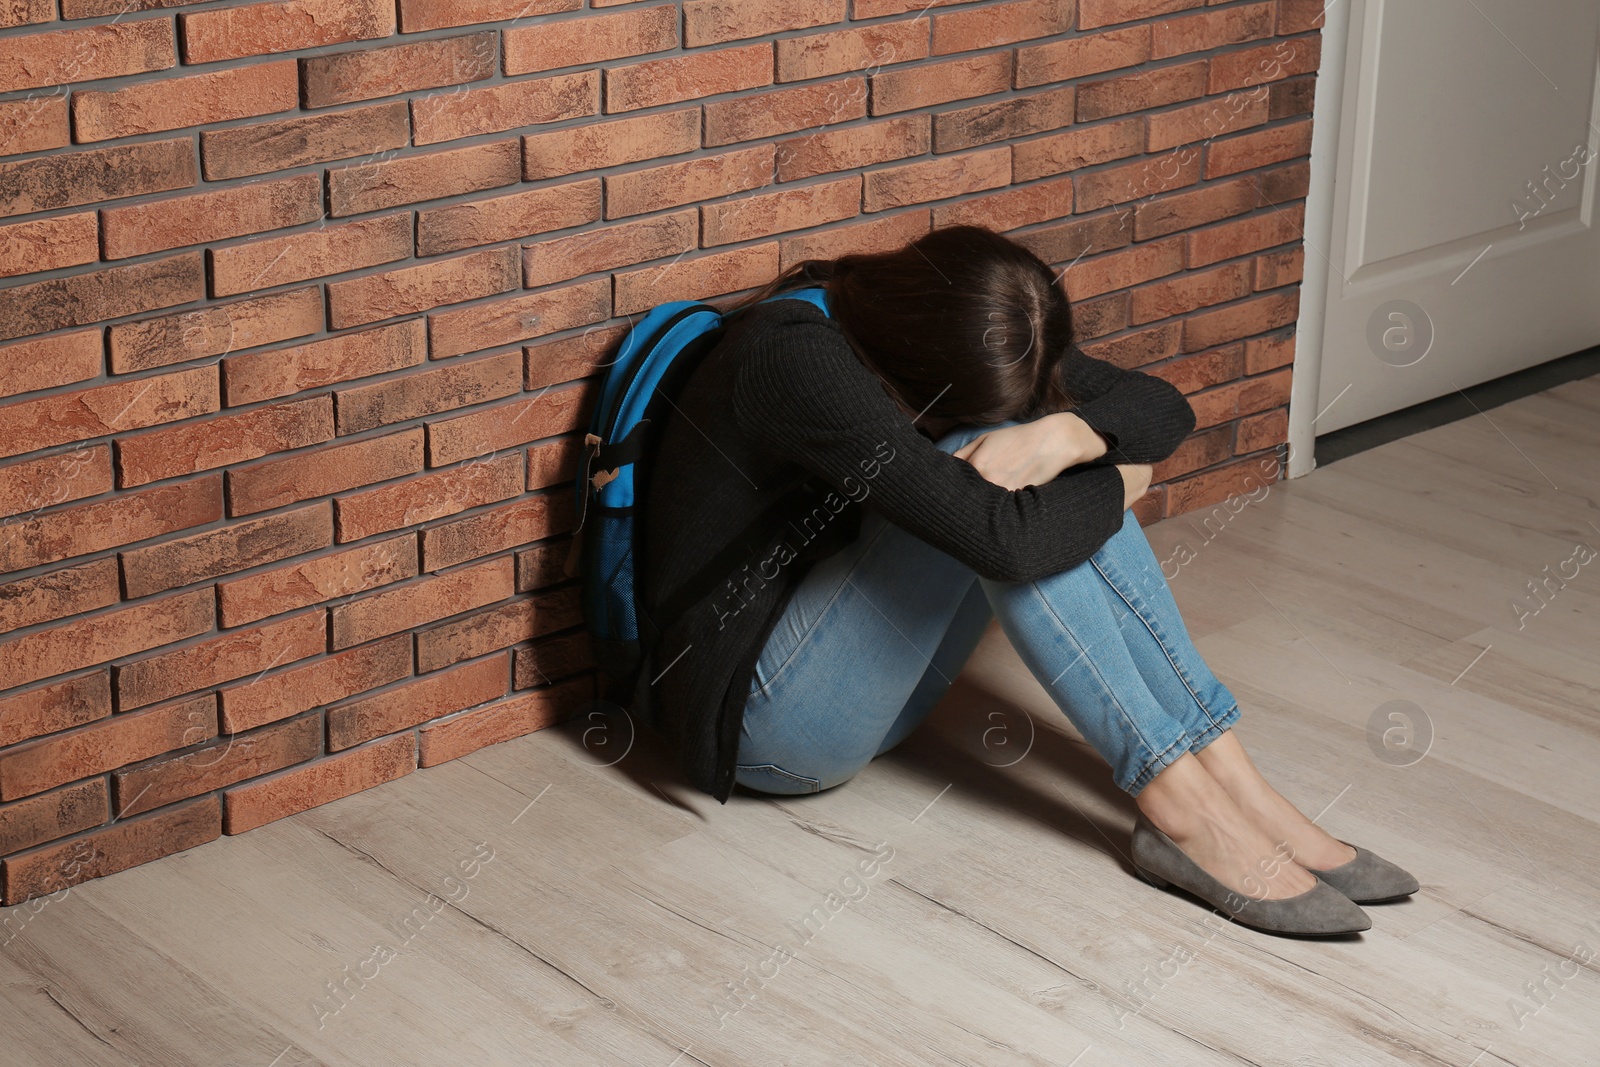 Photo of Upset teenage girl with backpack sitting on floor near wall. Space for text